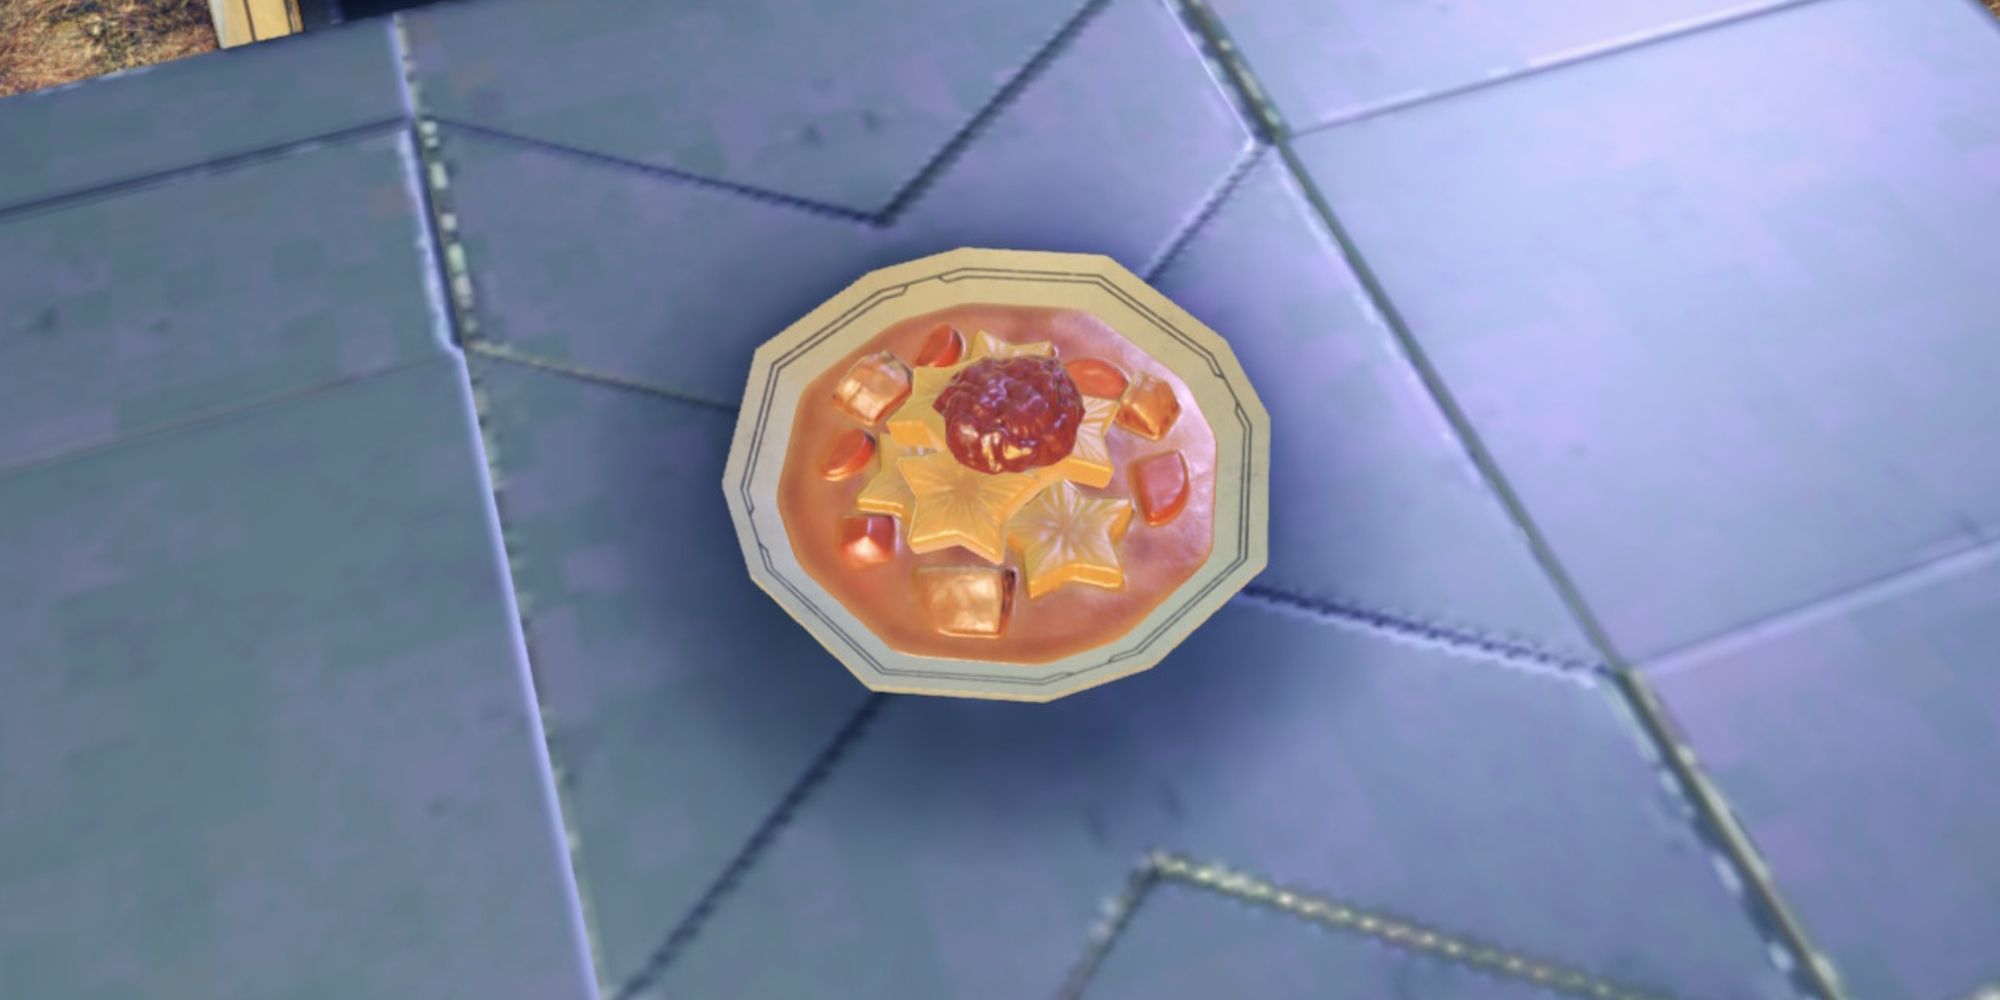 The Manana's Miso Soup Meal in Xenoblade Chronicles 3